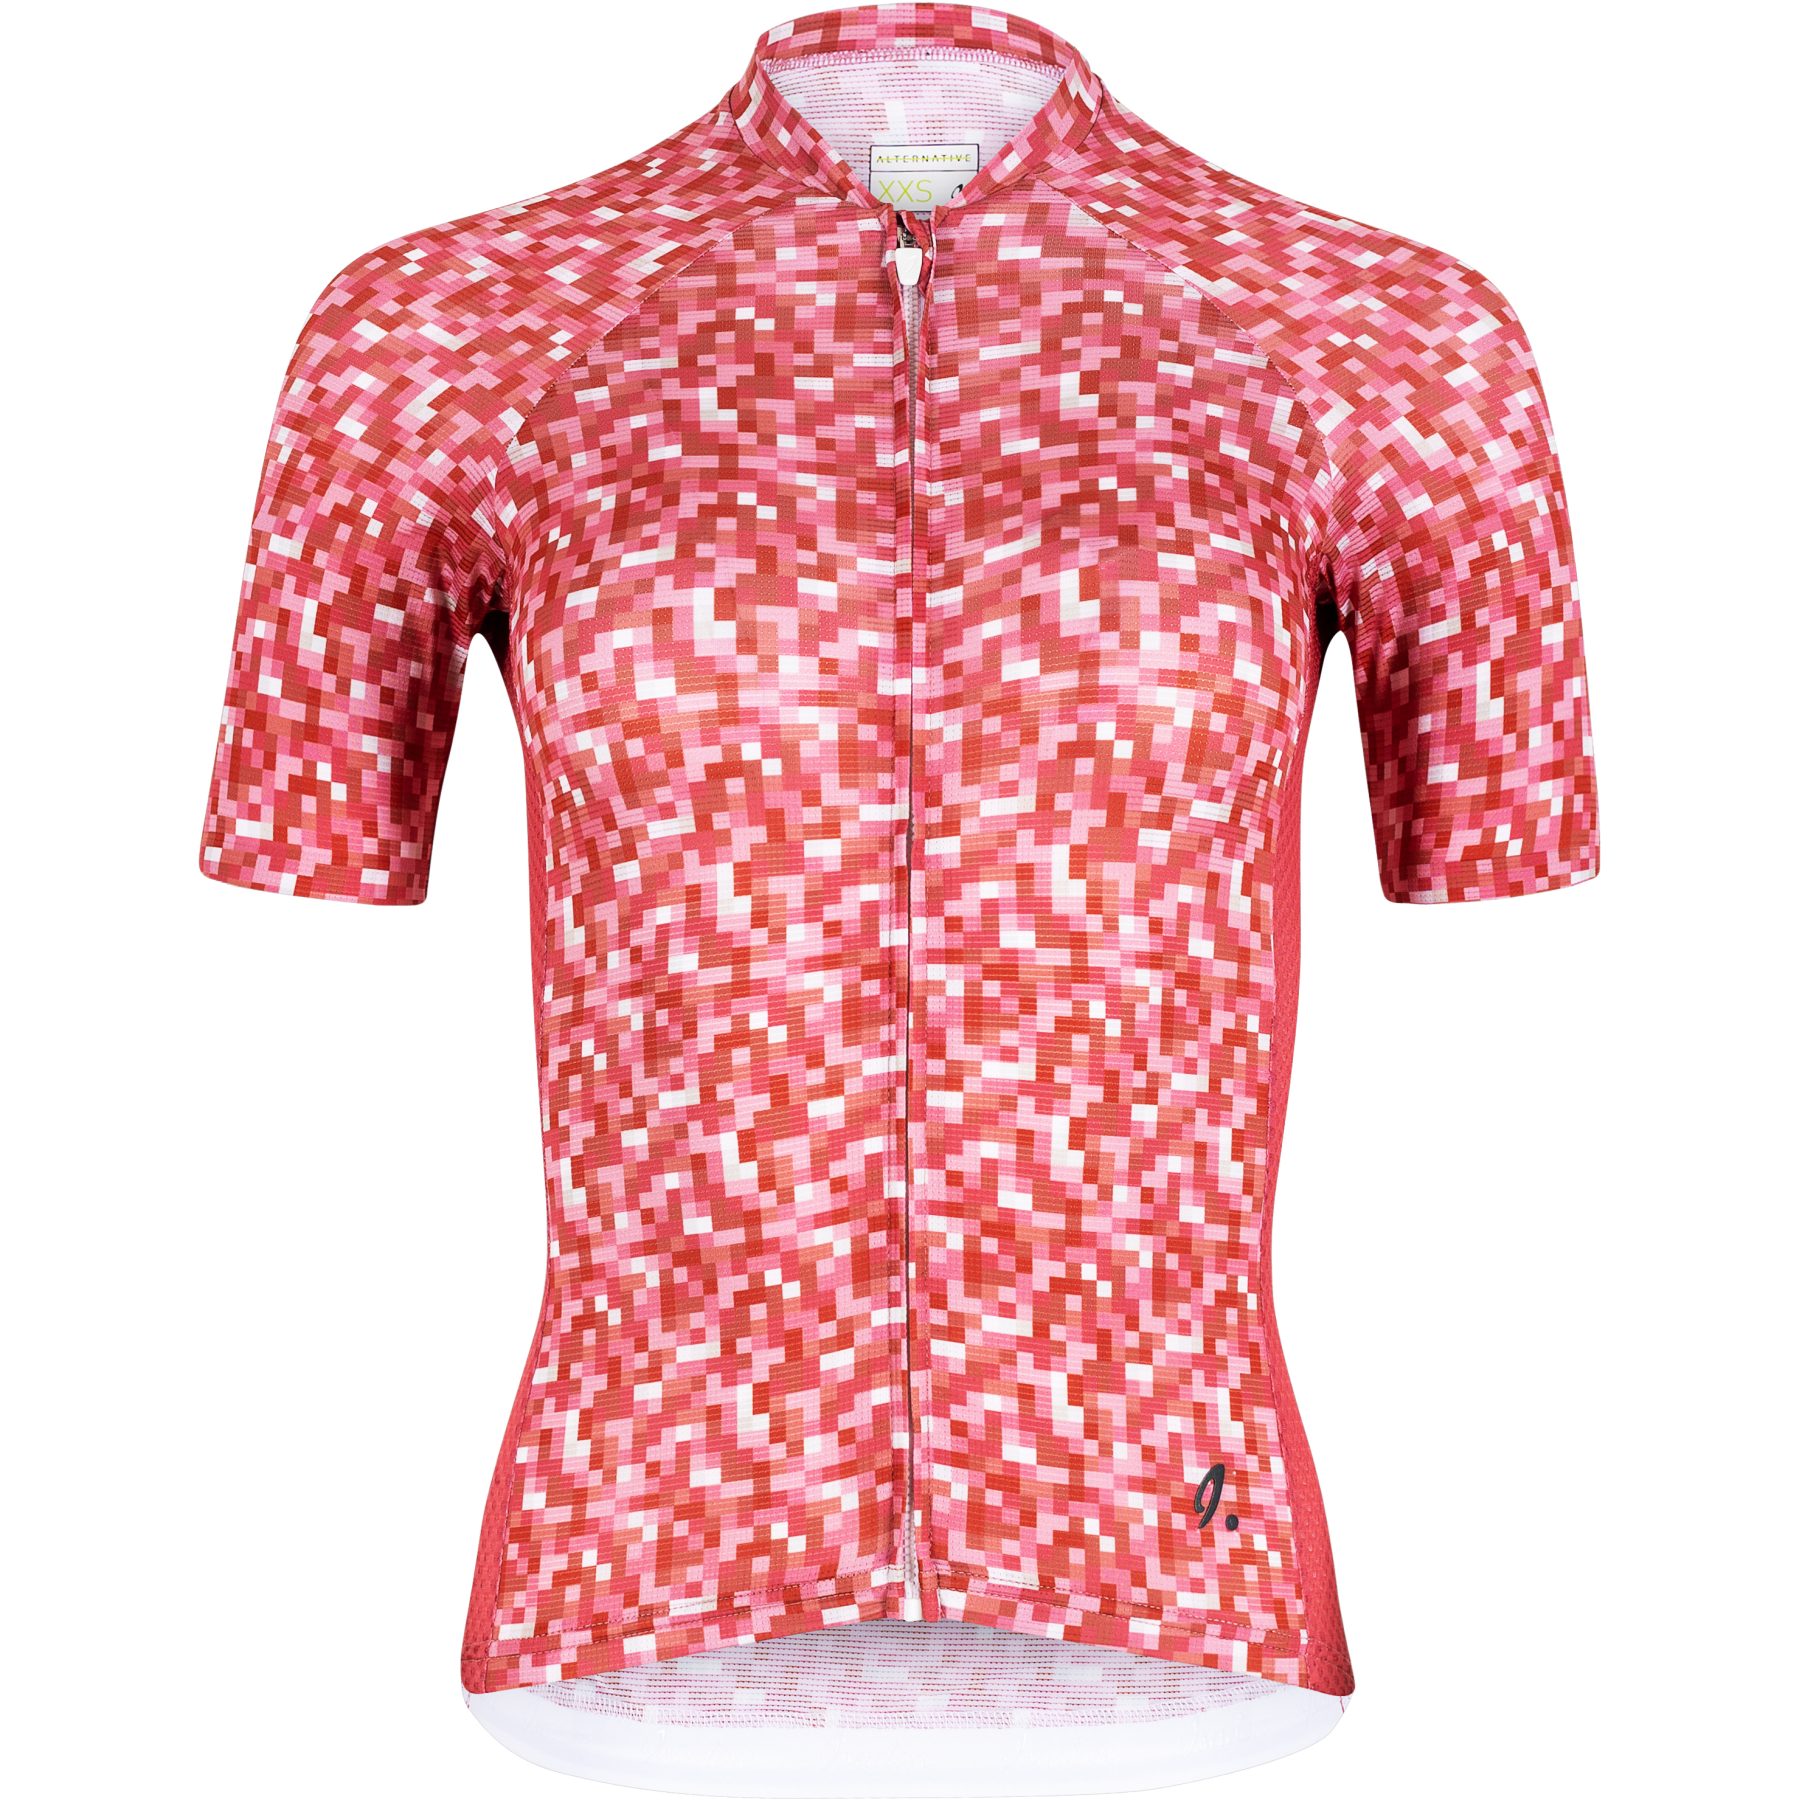 Image of Isadore Alternative Women's Cycling Jersey - Mineral Red